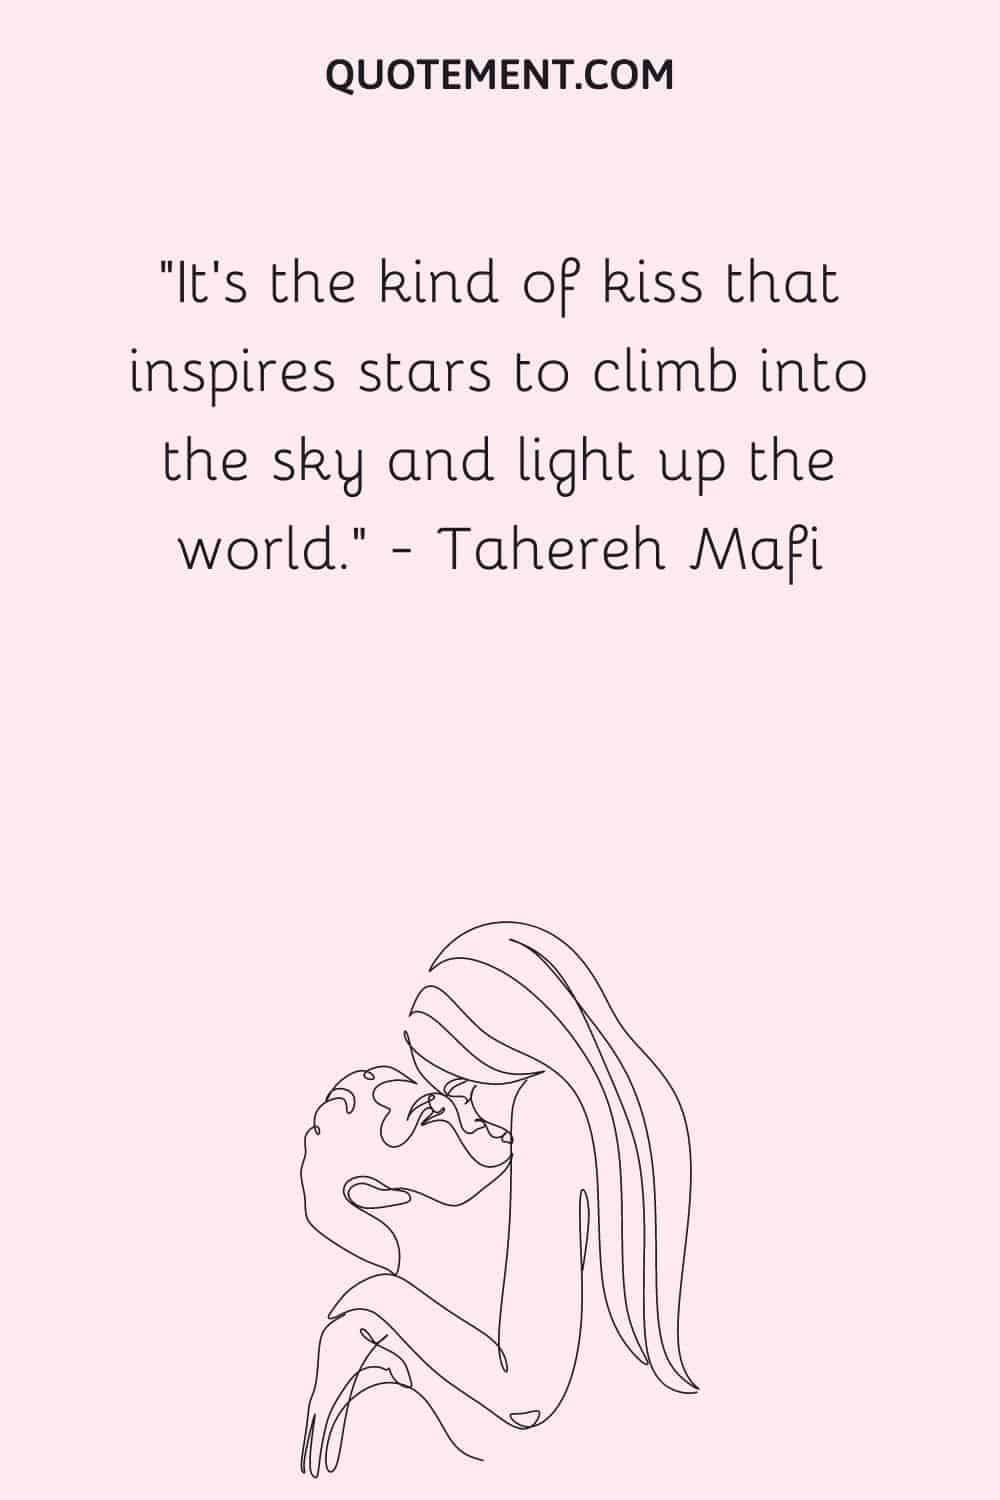 It's the kind of kiss that inspires stars to climb into the sky and light up the world. ― Tahereh Mafi